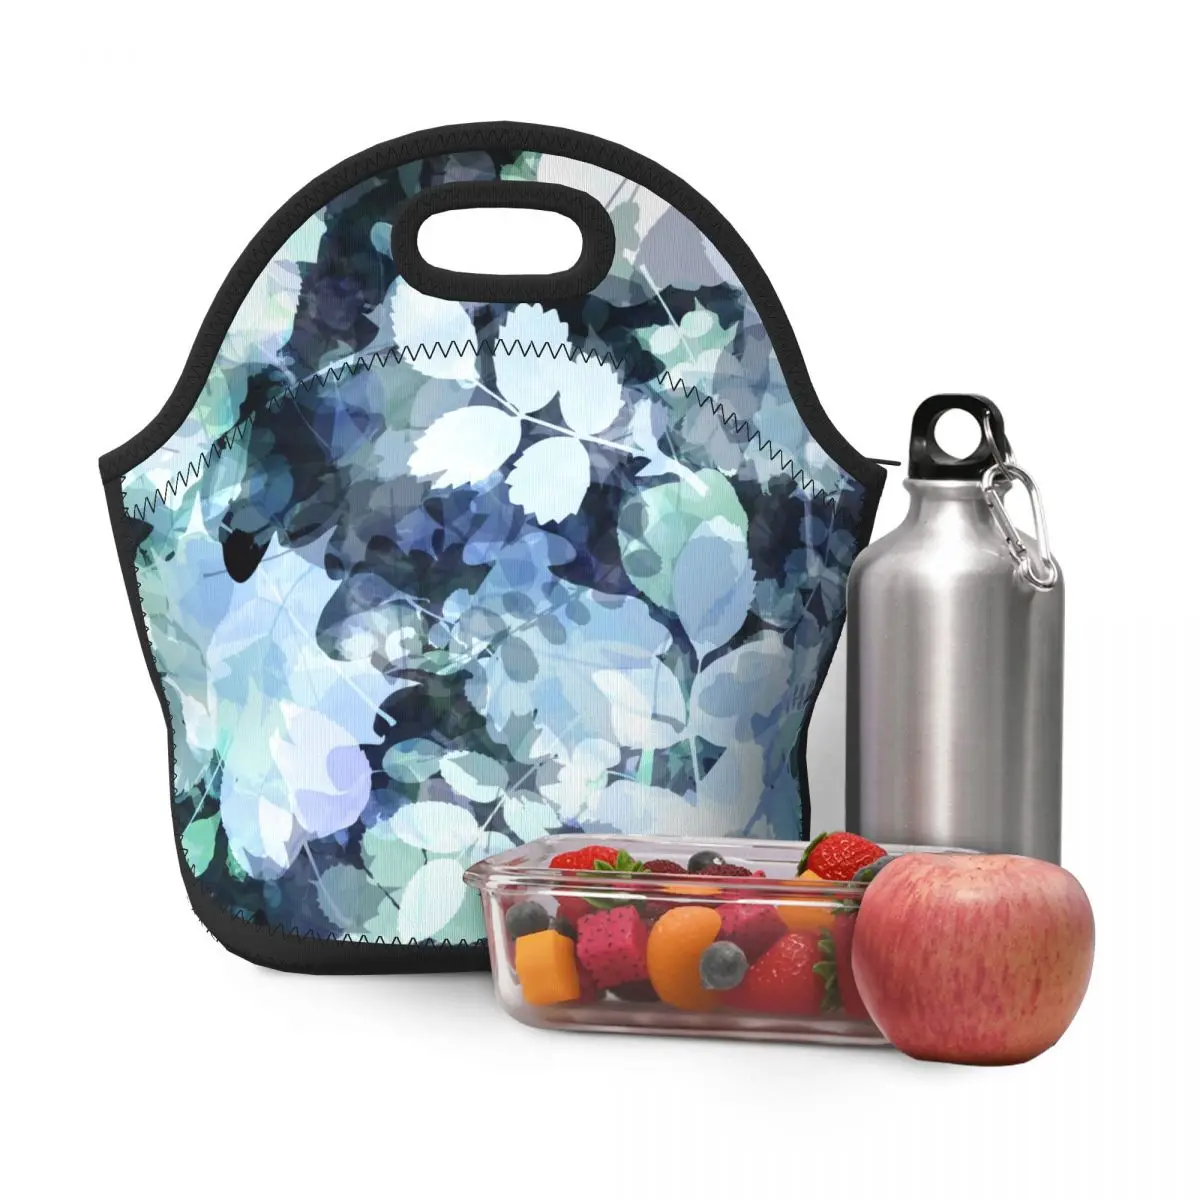 

Floral Lunch Bags for Women Girls School Lunch Box Food Fruits Drinks Organizer Grocery Pouch Top Handle Bags Cooler Bags